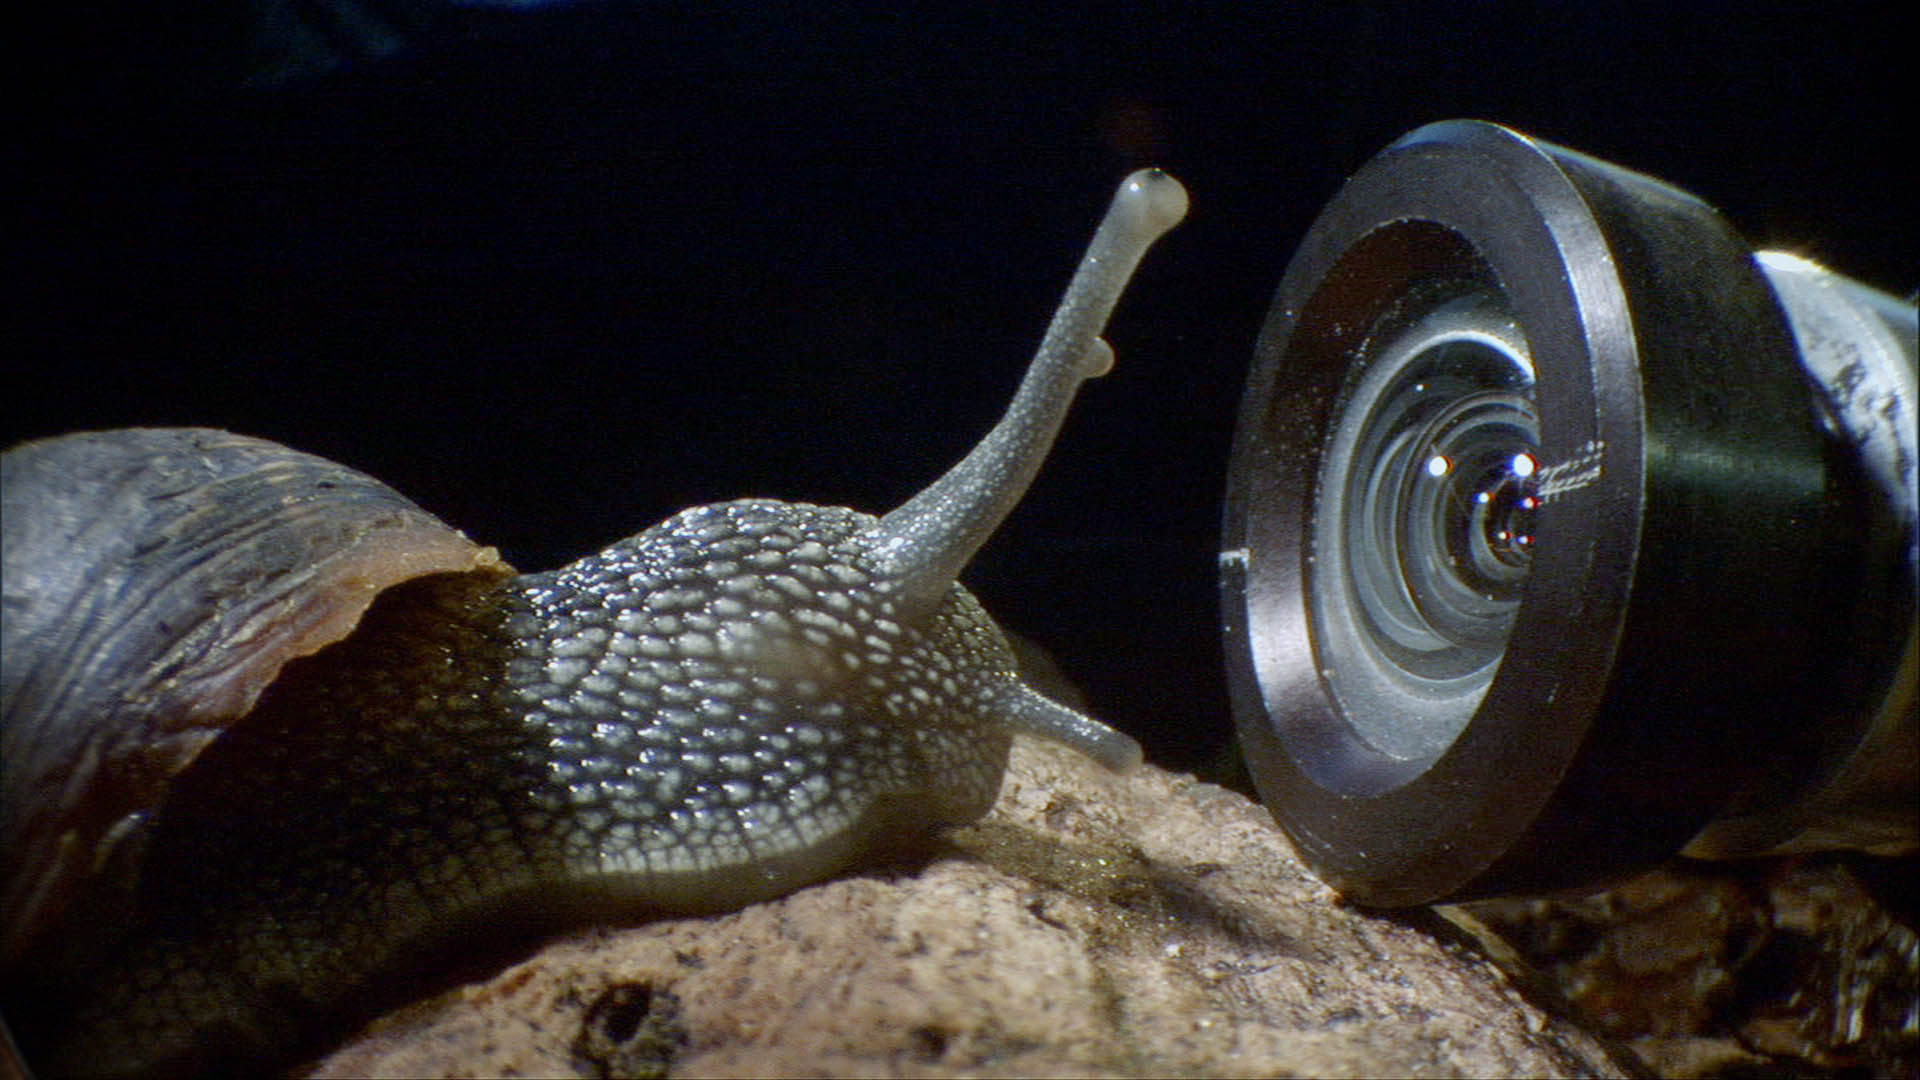 A snail gets its close-up (courtesy of Ammonite Films)